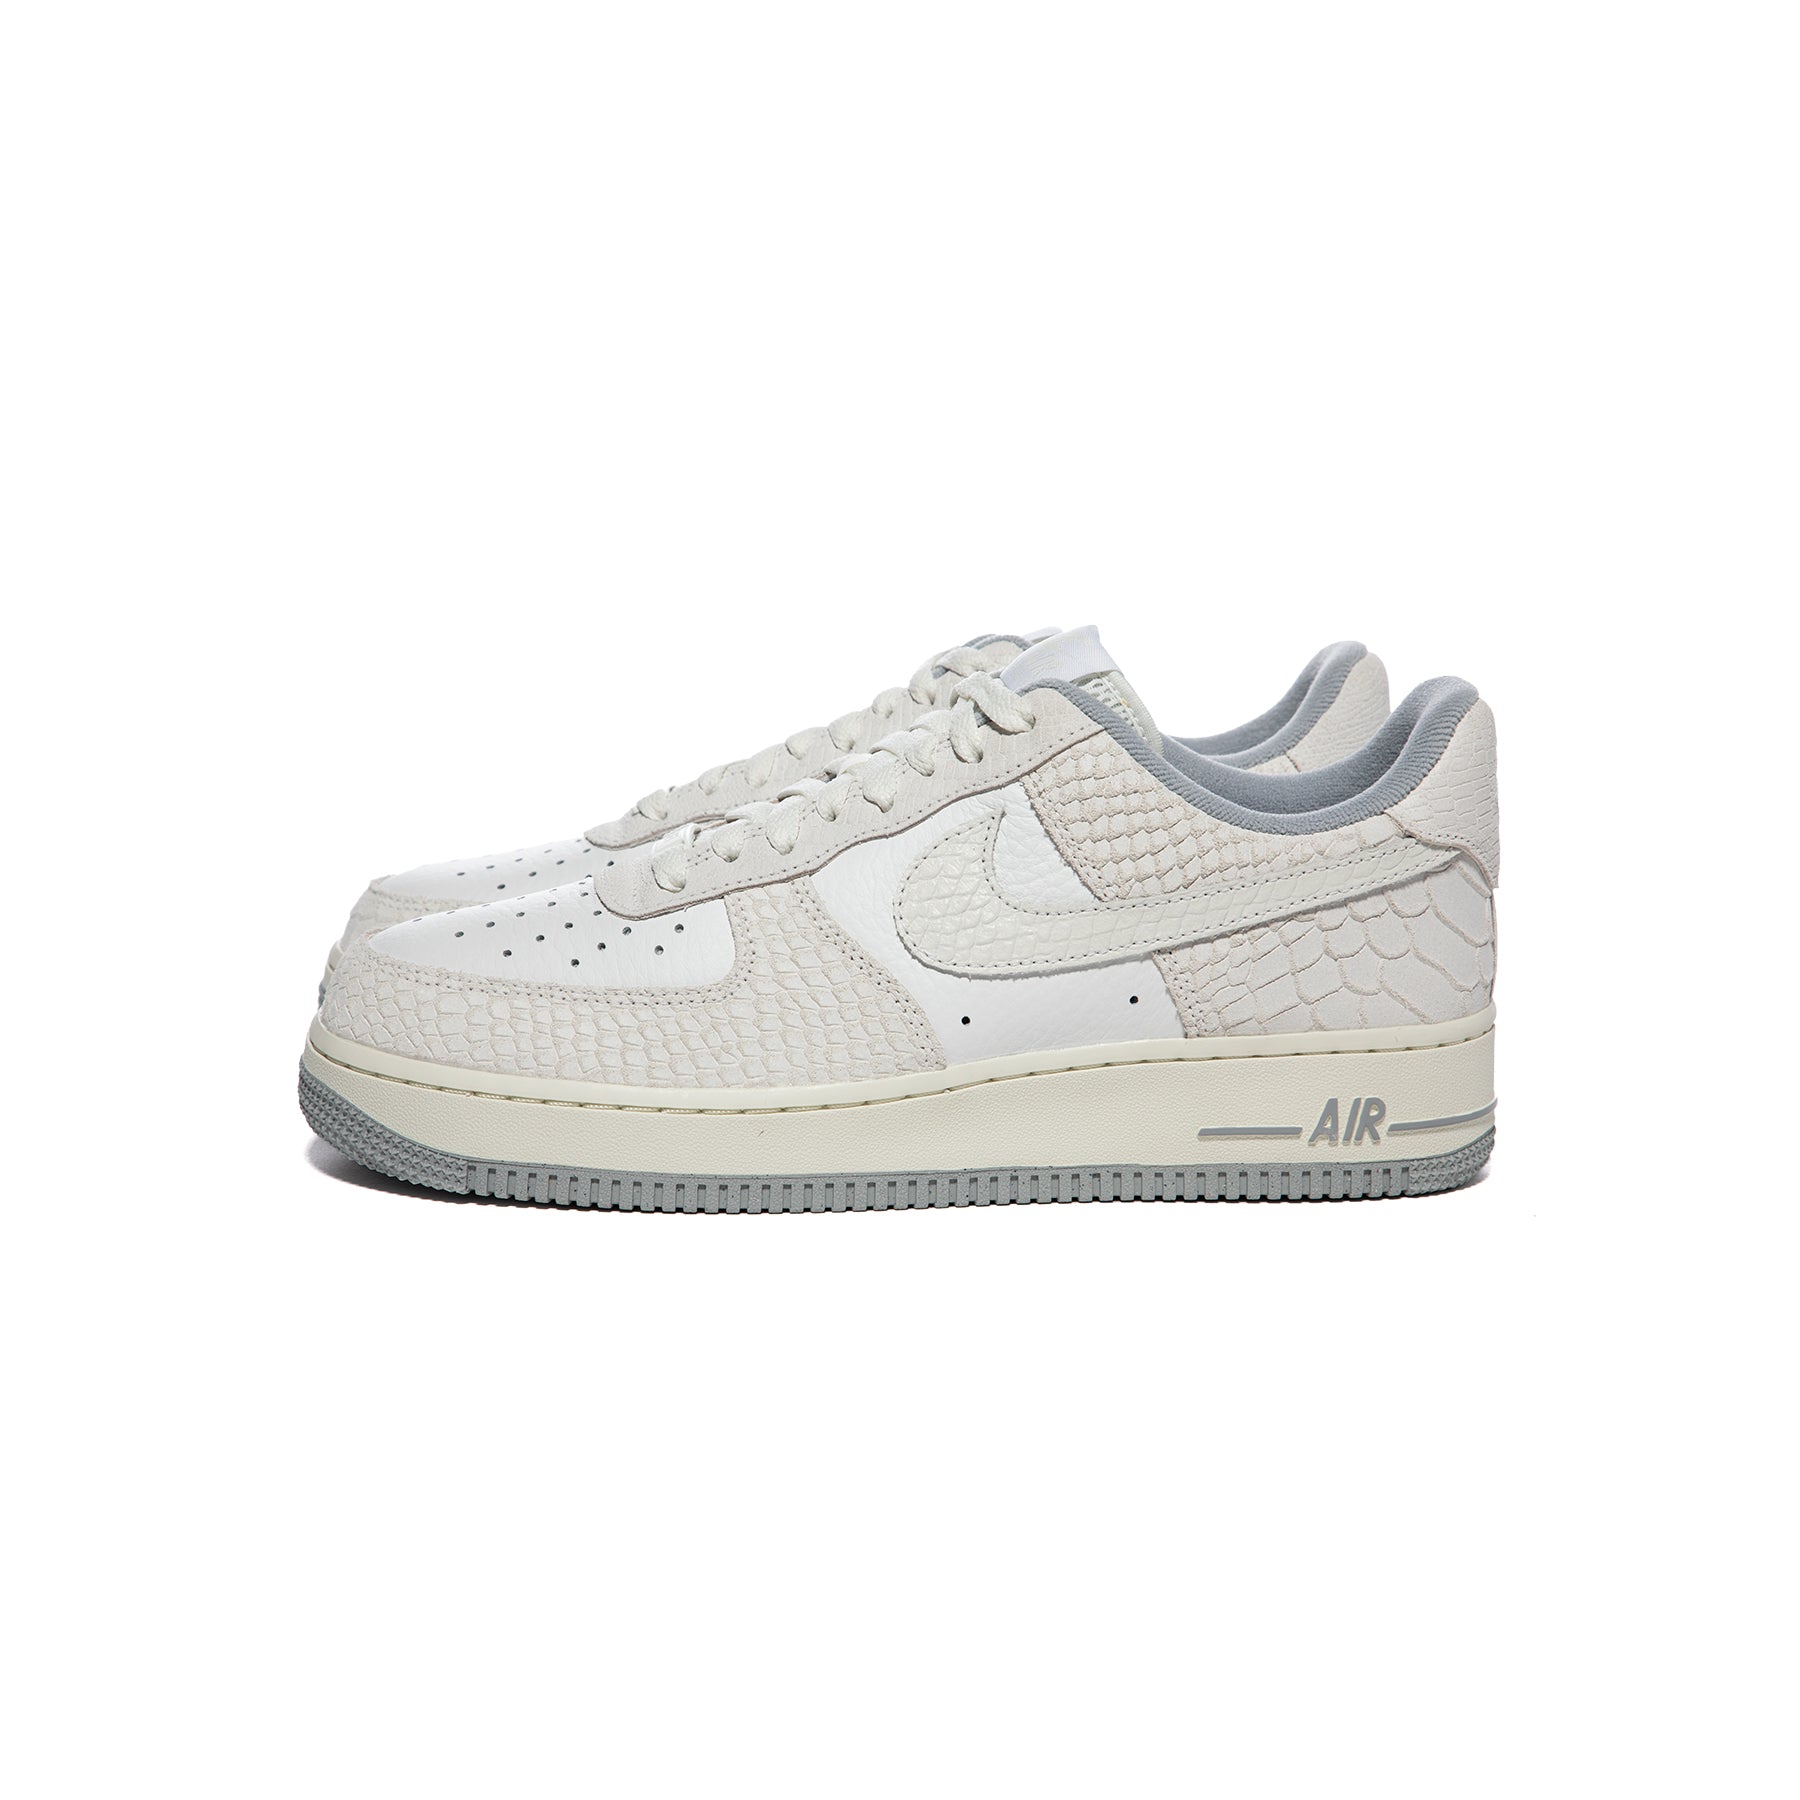 muy agradable Donación Carne de cordero Nike Womens Air Force 1 '07 (Summit White/Summit White/Sail/Wolf Grey) –  Concepts